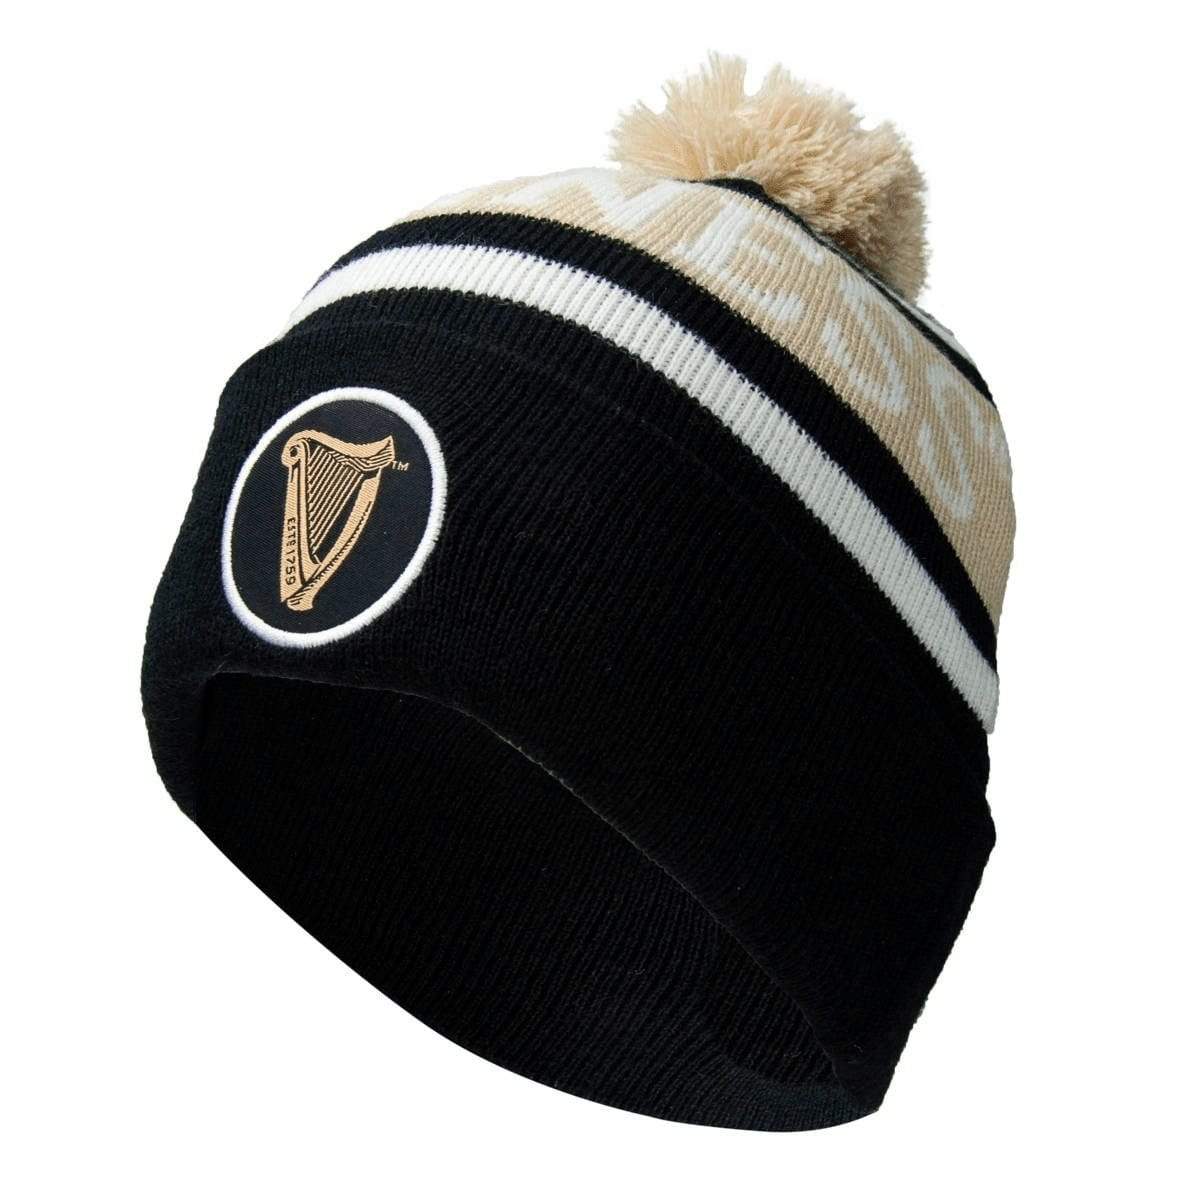 Rugby Imports Guinness Black and White Premium Beanie